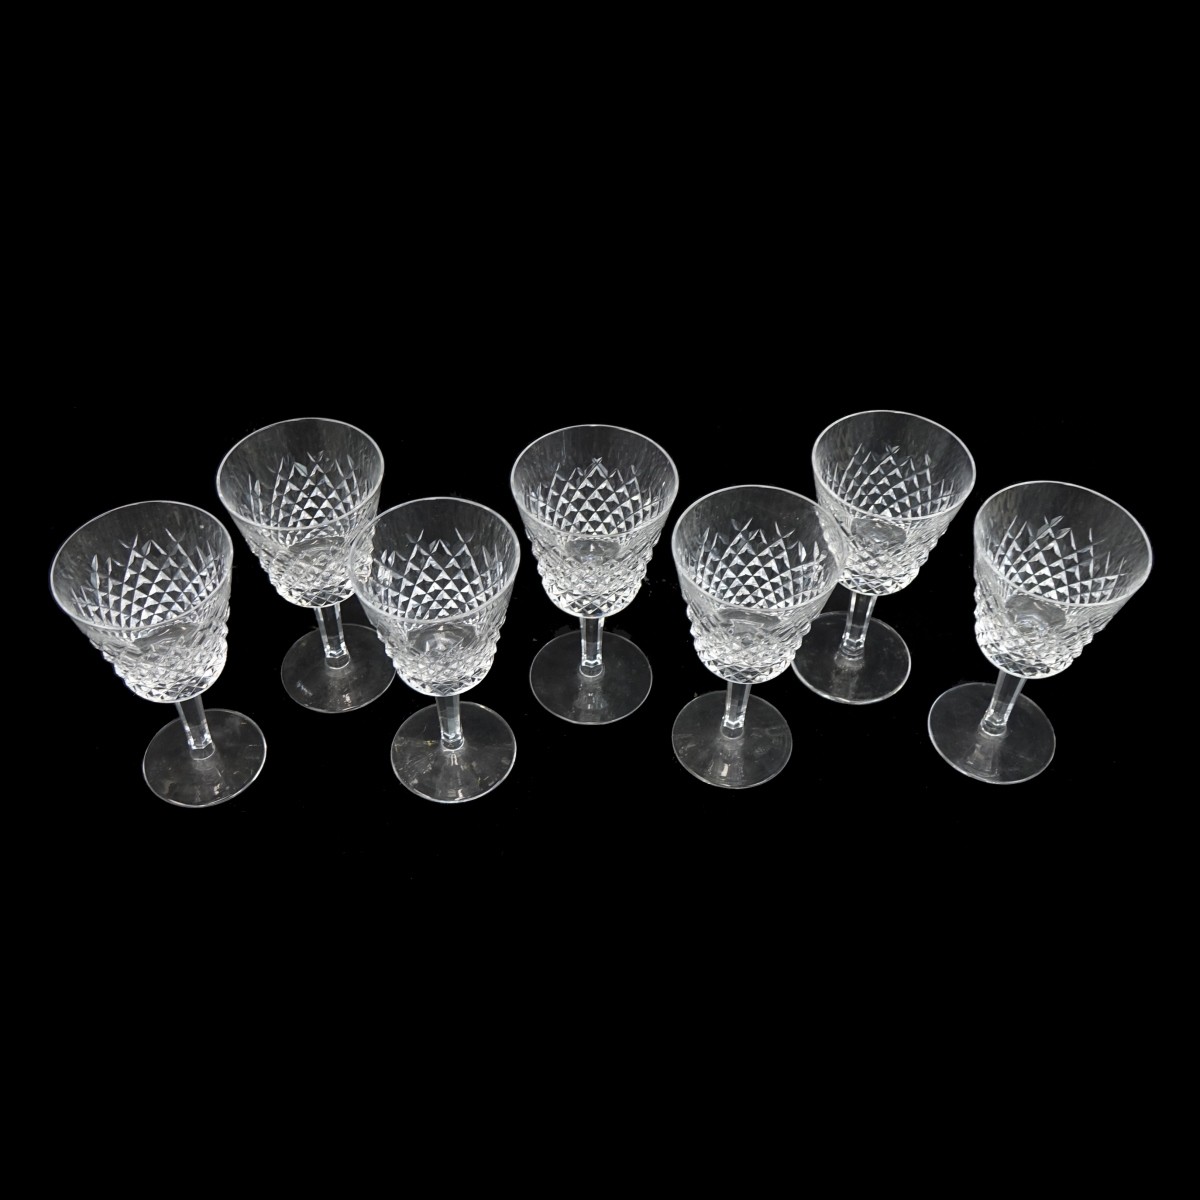 Seven (7) Waterford "Alana" Claret Wine Glasses